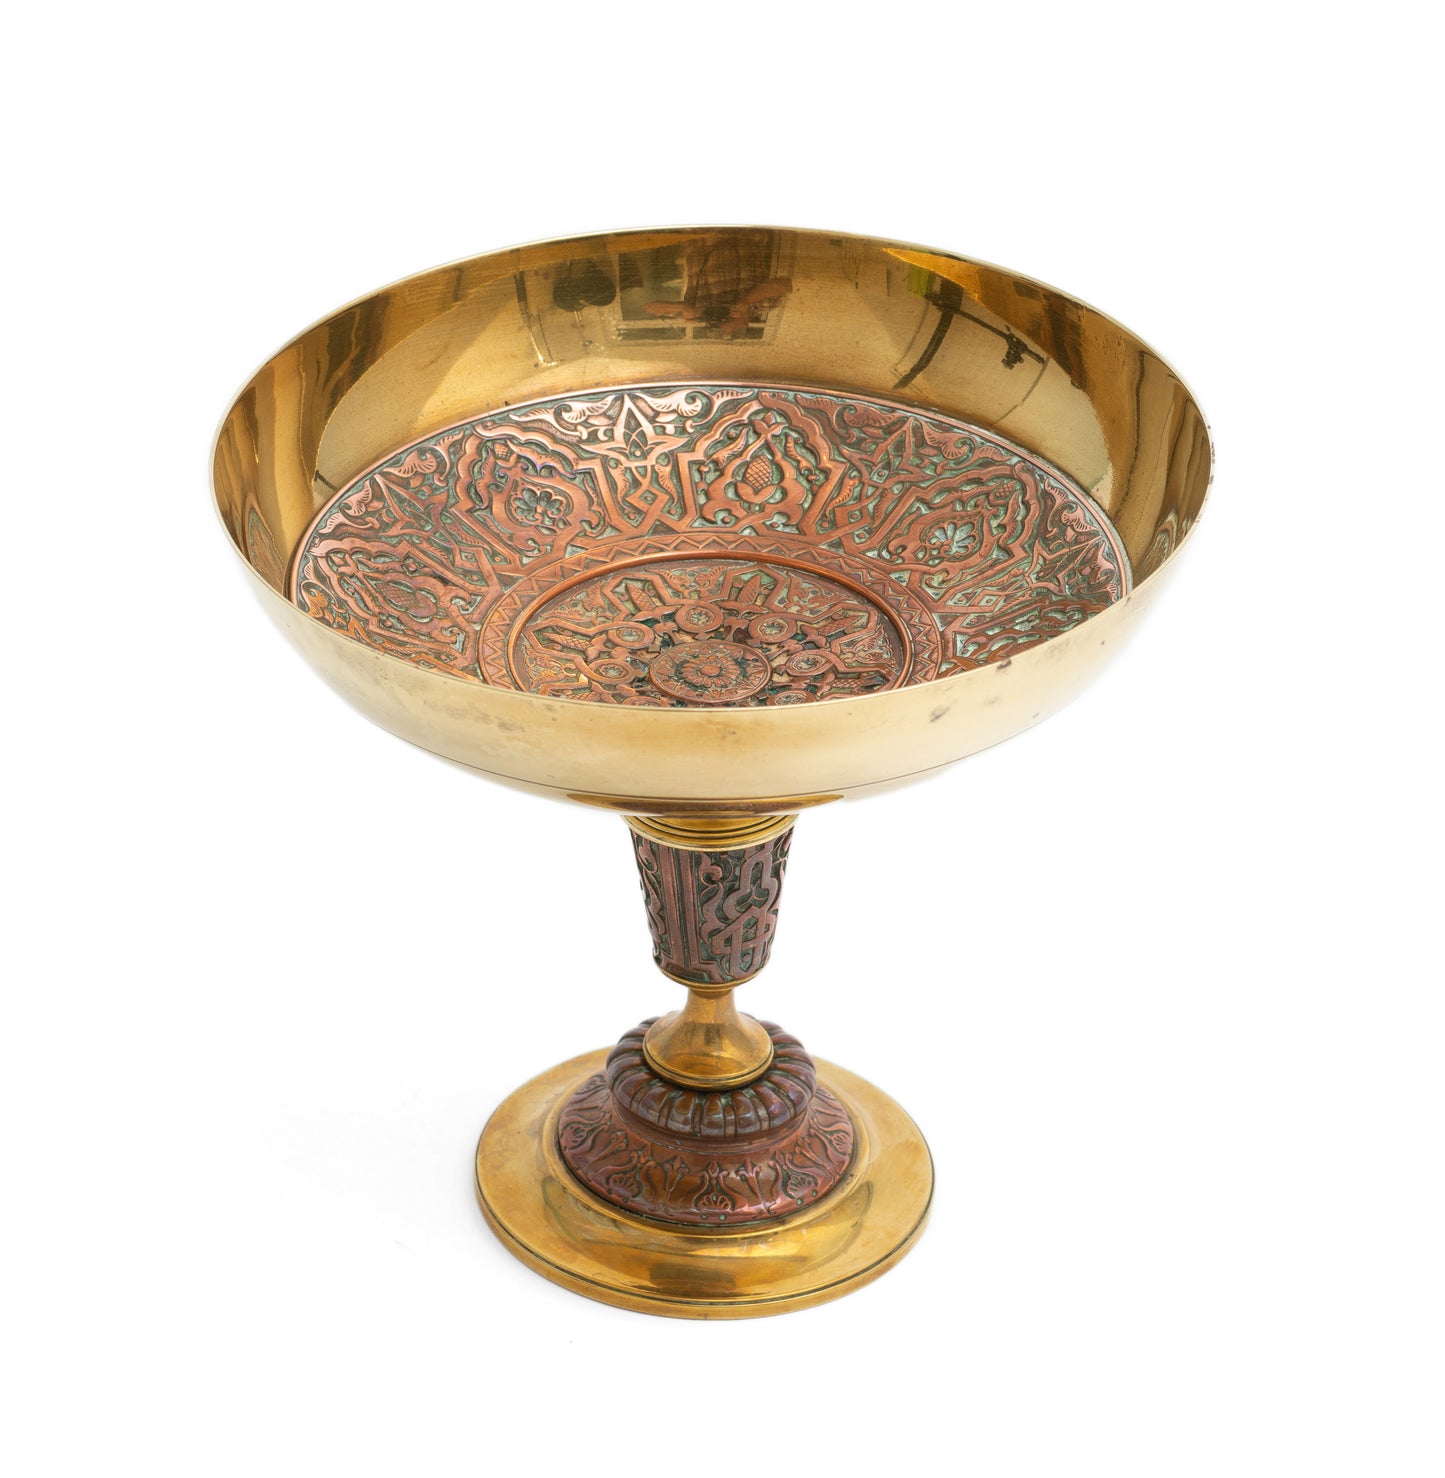 Antique Islamic Middle Eastern Copper & Brass Pedestal Bowl / Comport (Code 2232)